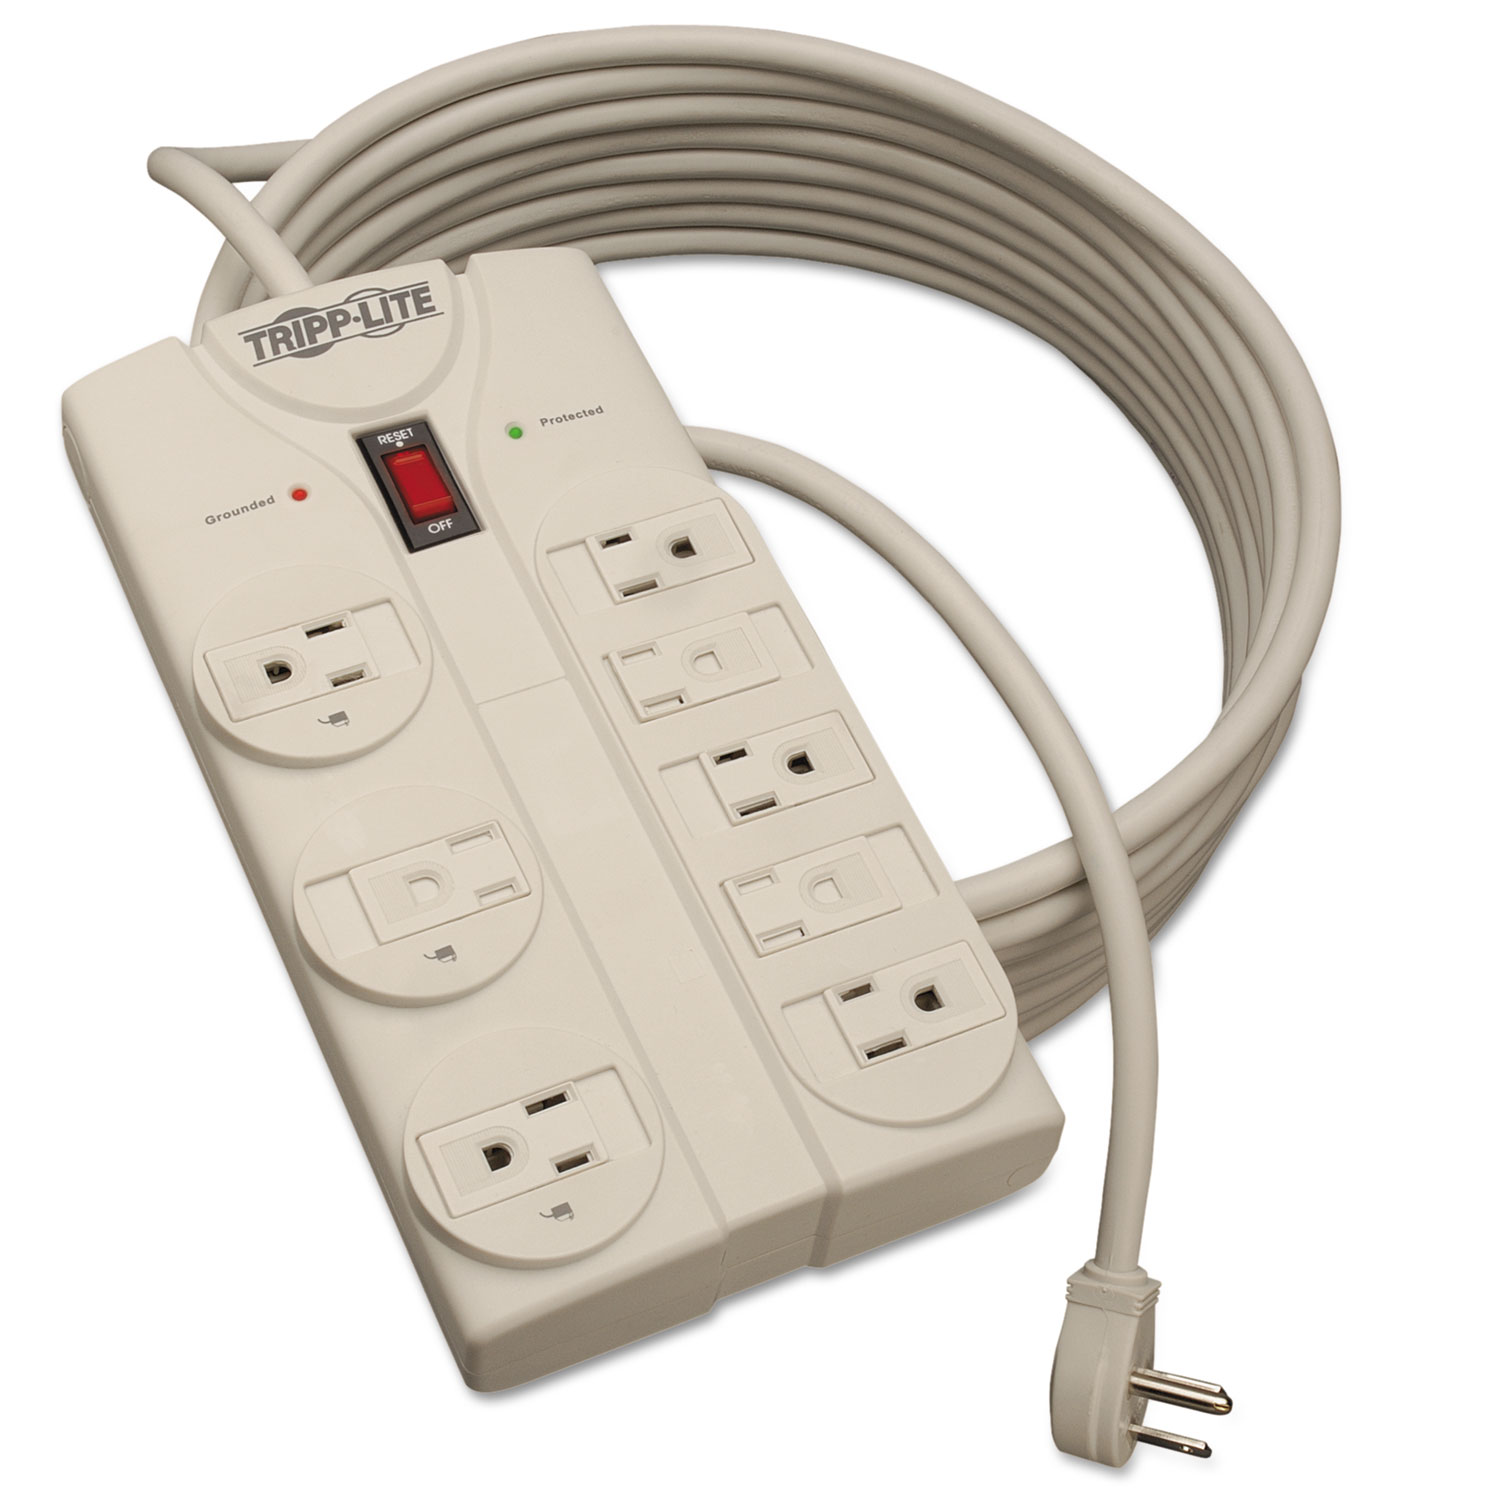 Protect It! Surge Protector, 8 Outlets, 25 ft. Cord, 1440 Joules, Light Gray